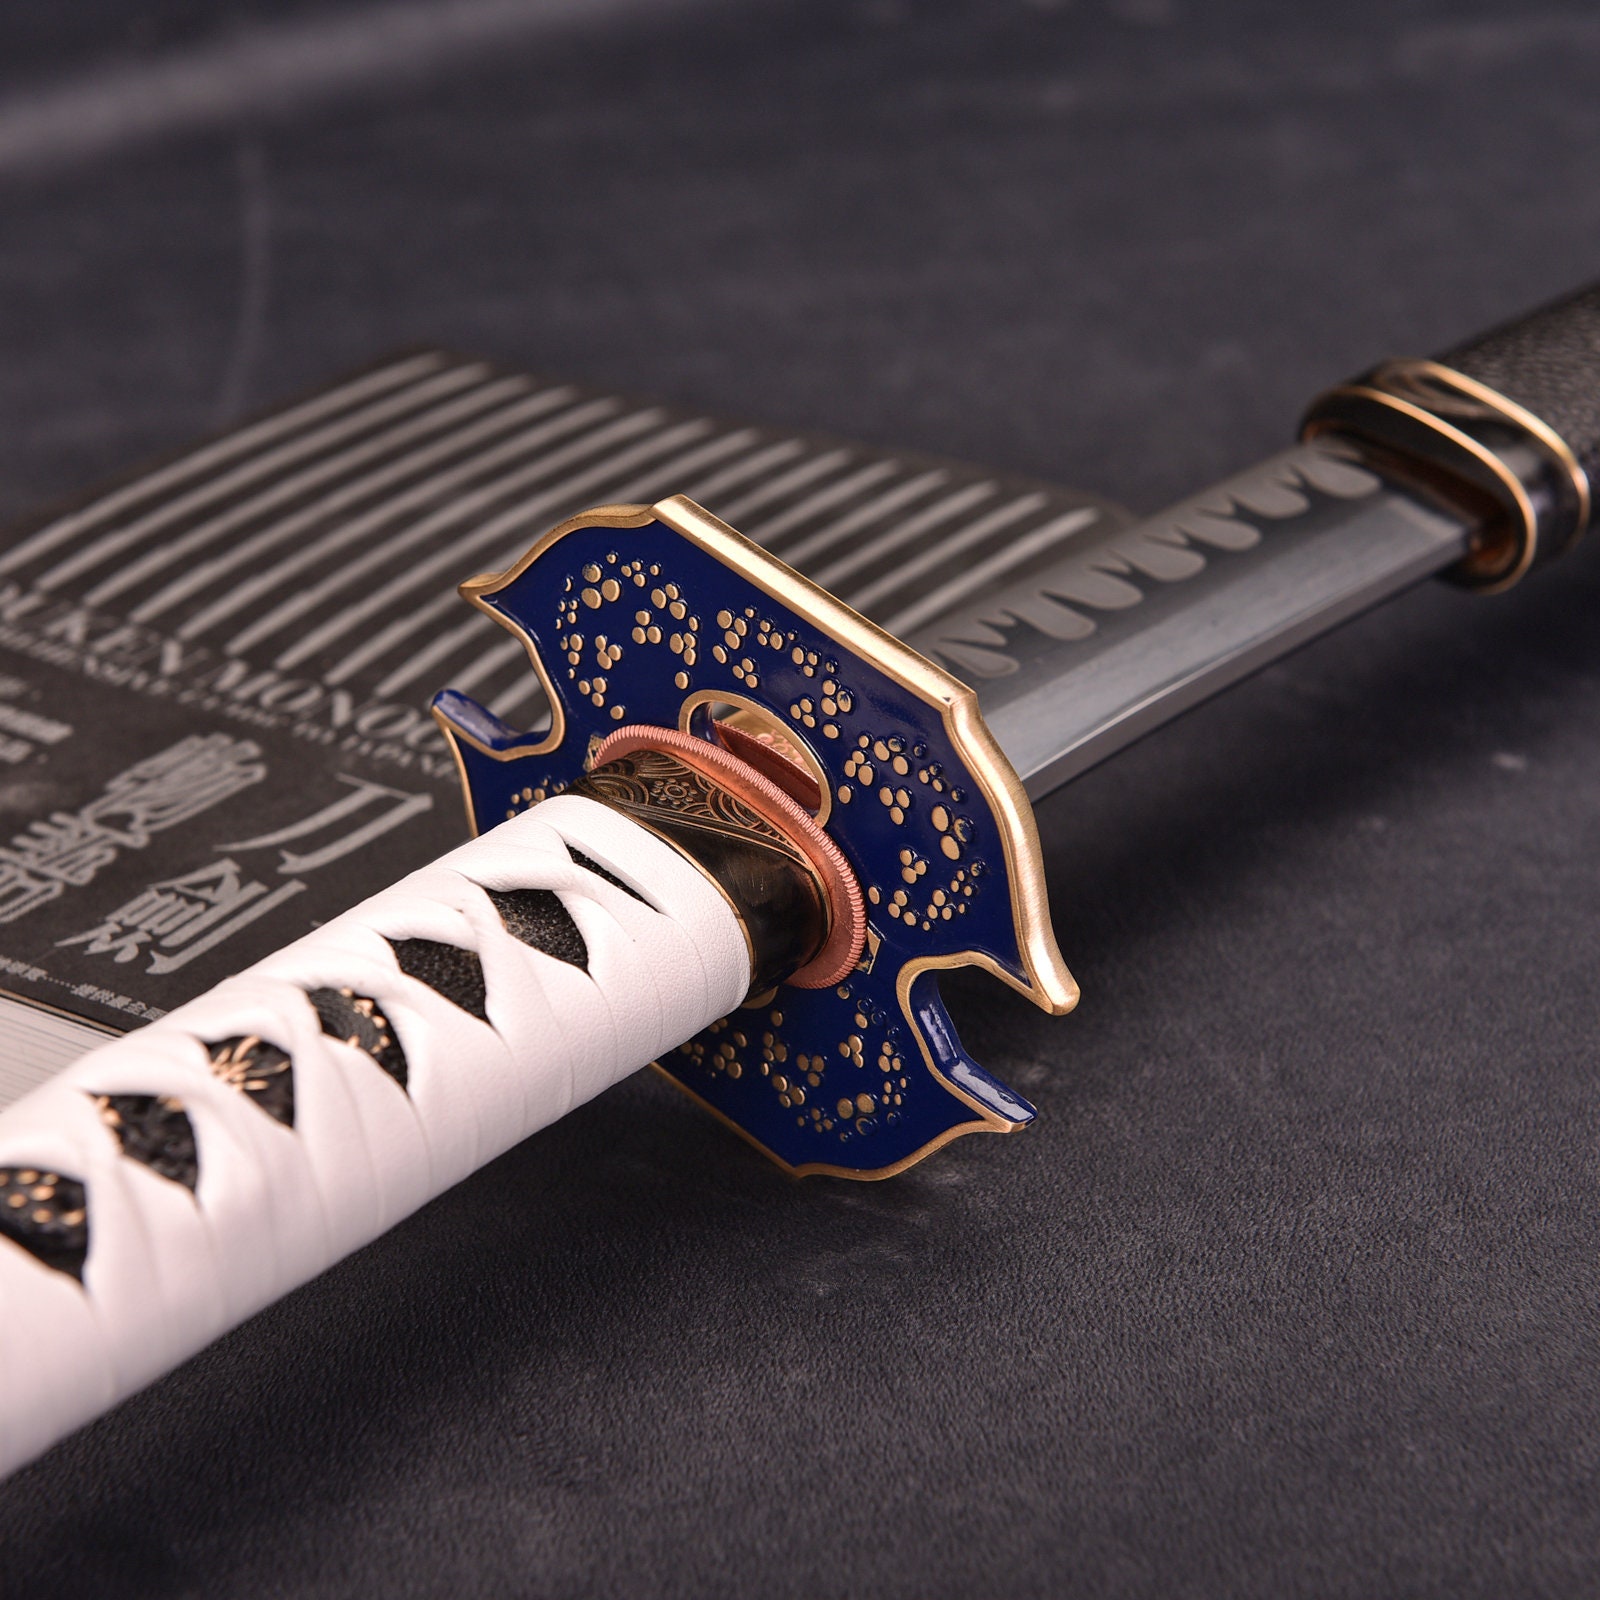  Yongli Sword Handmade Full Tang Vergil Yamato Sword Game Anime  Katana Cosplay Replica 1045 Carbon Steel, High Manganese Steel or T10 Steel  Clay-Tempered (I) : Sports & Outdoors